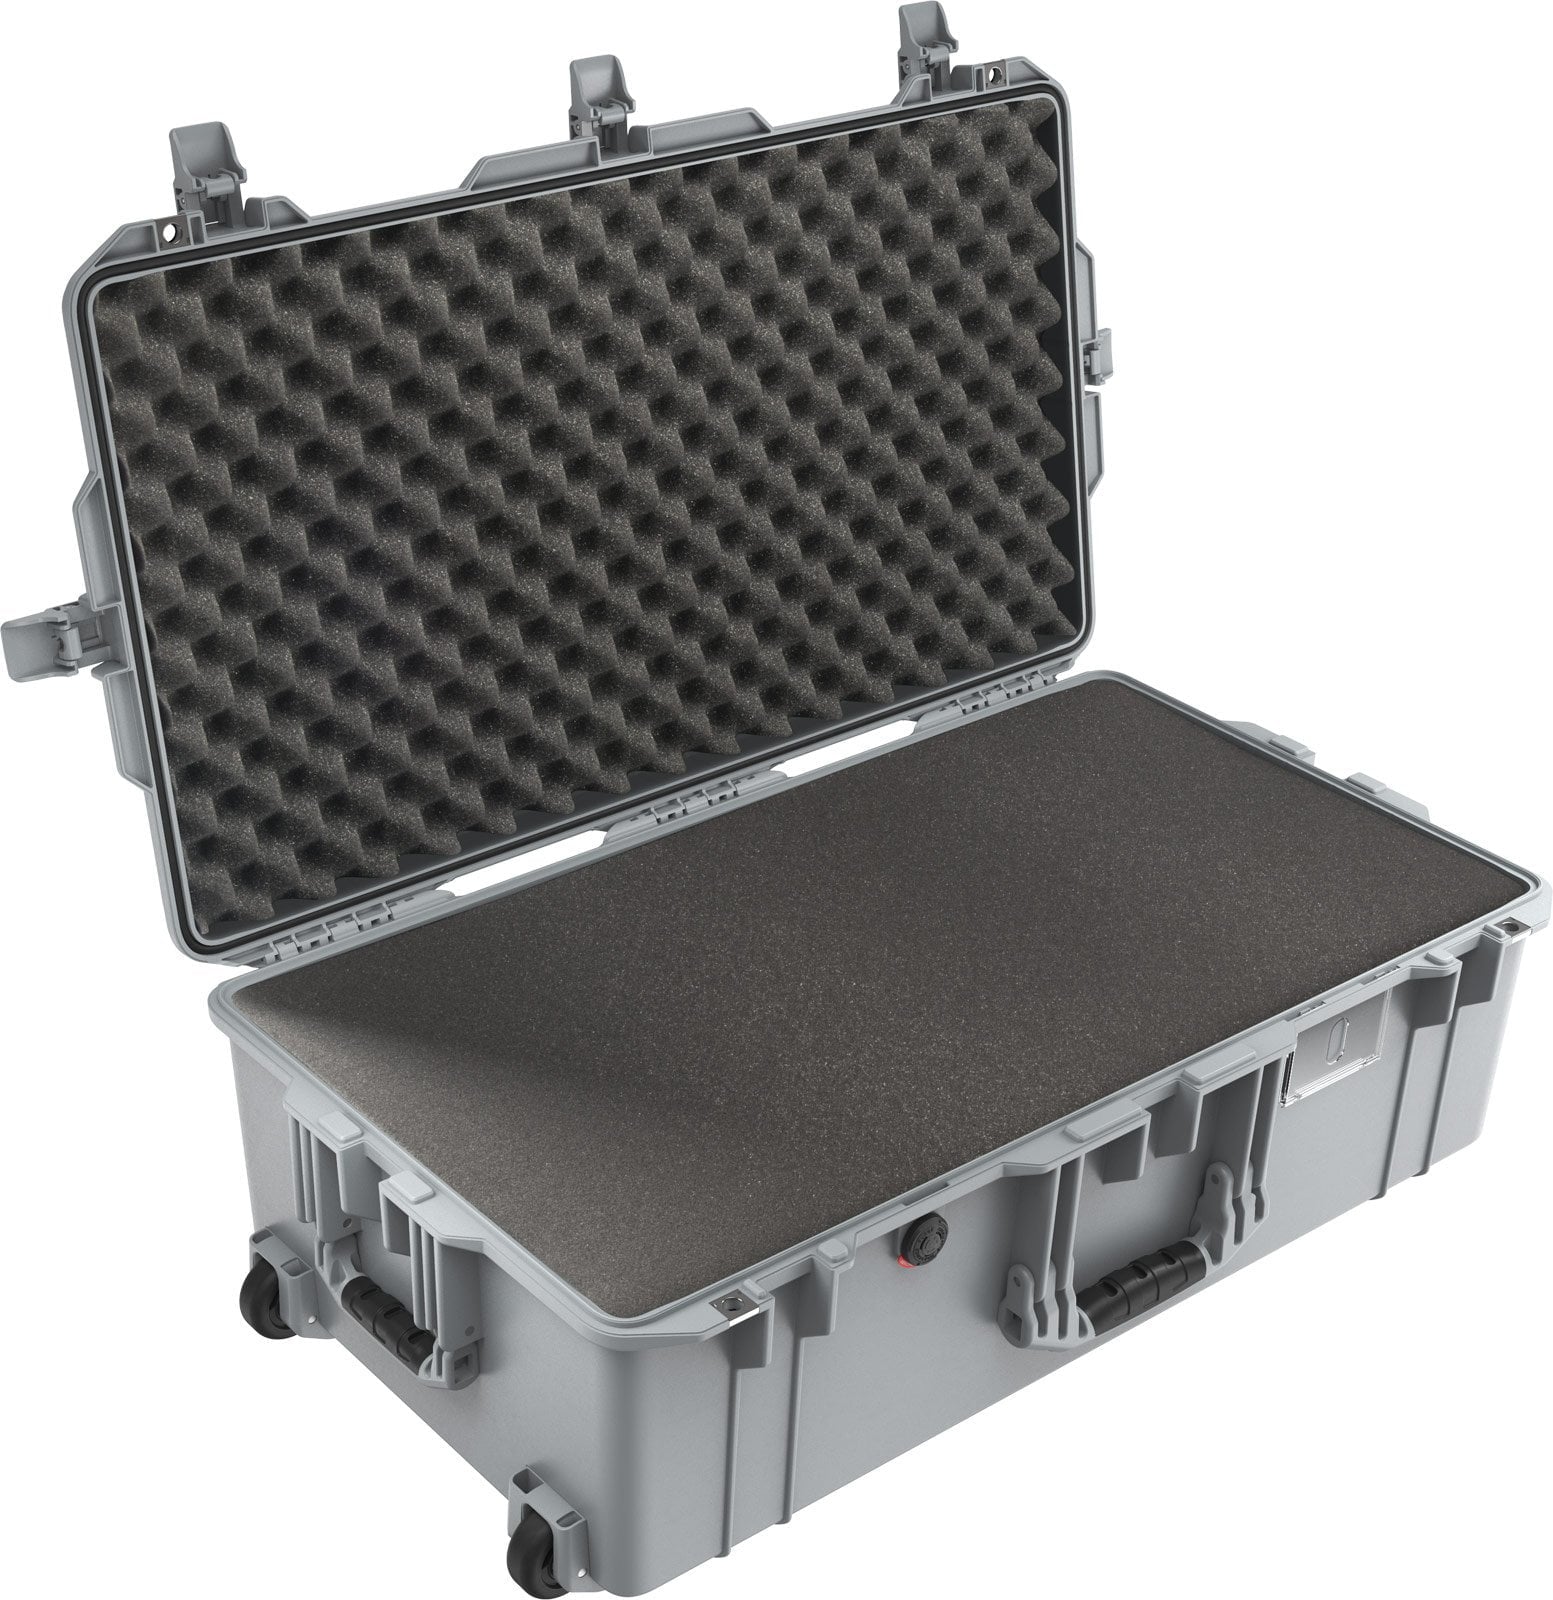 Pelican Protector Case 1615 Air Case - With Foam